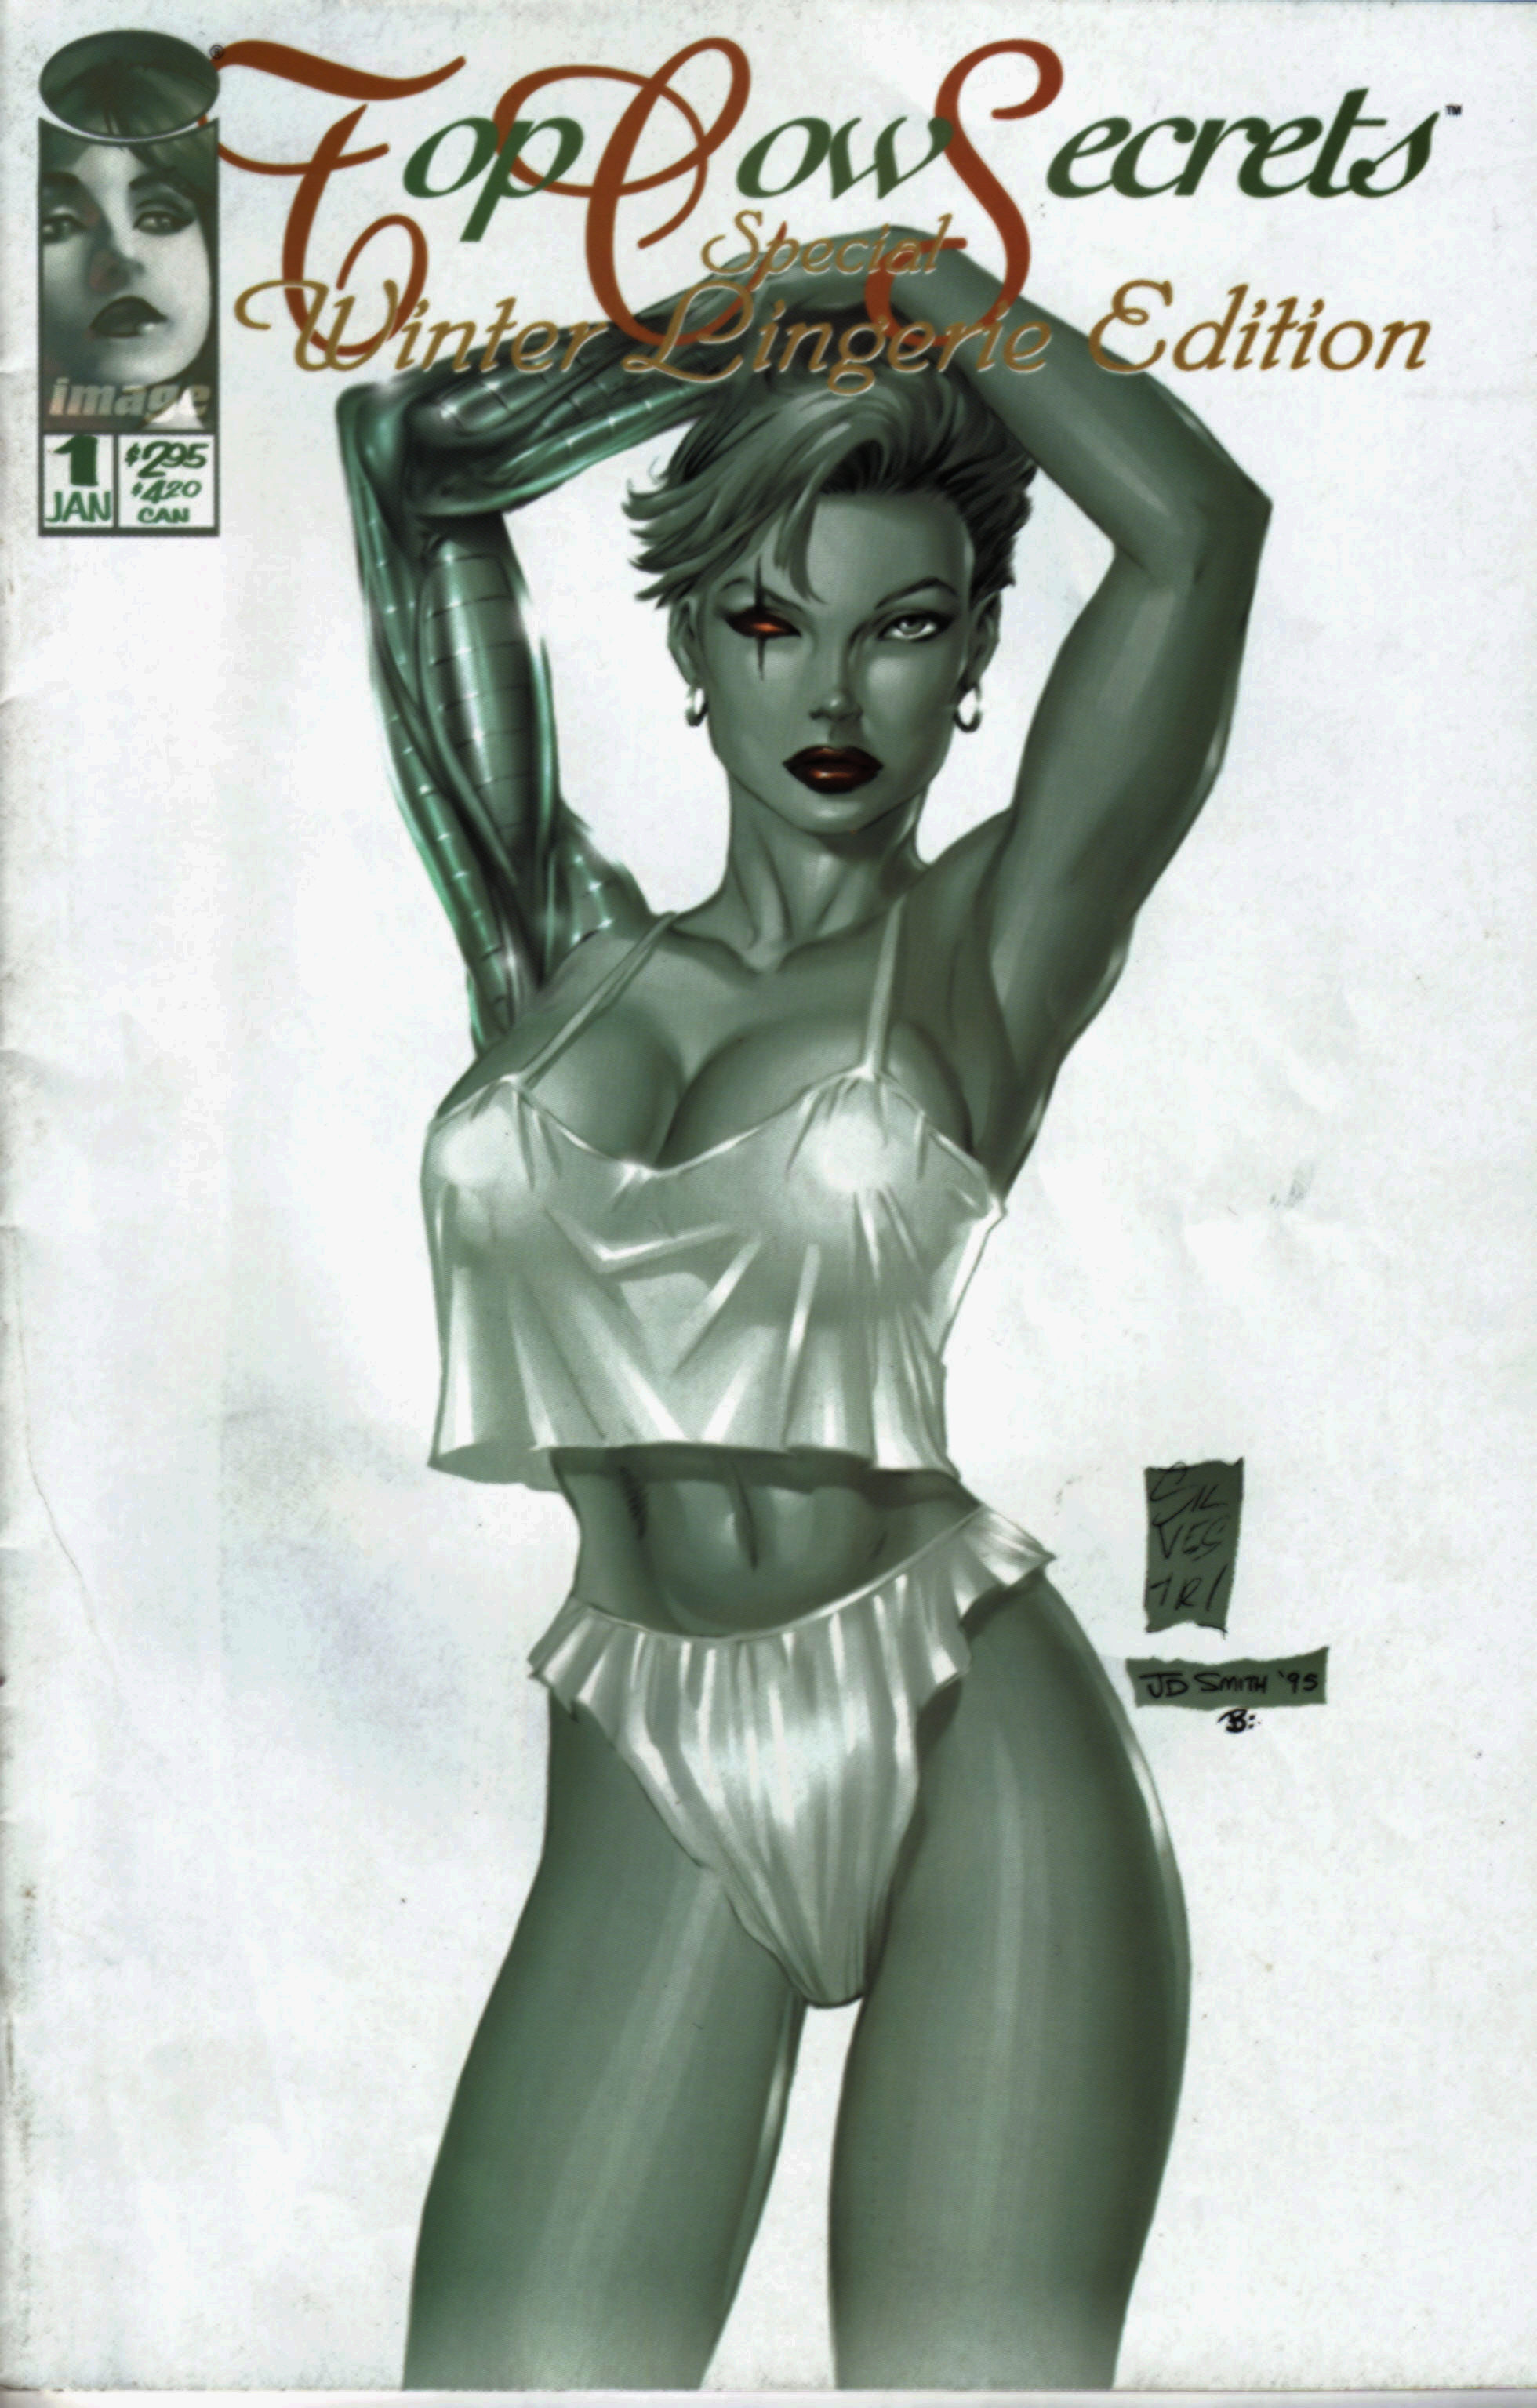 Read online Top Cow Secrets-Special Winter Lingerie Edition comic -  Issue # Full - 35